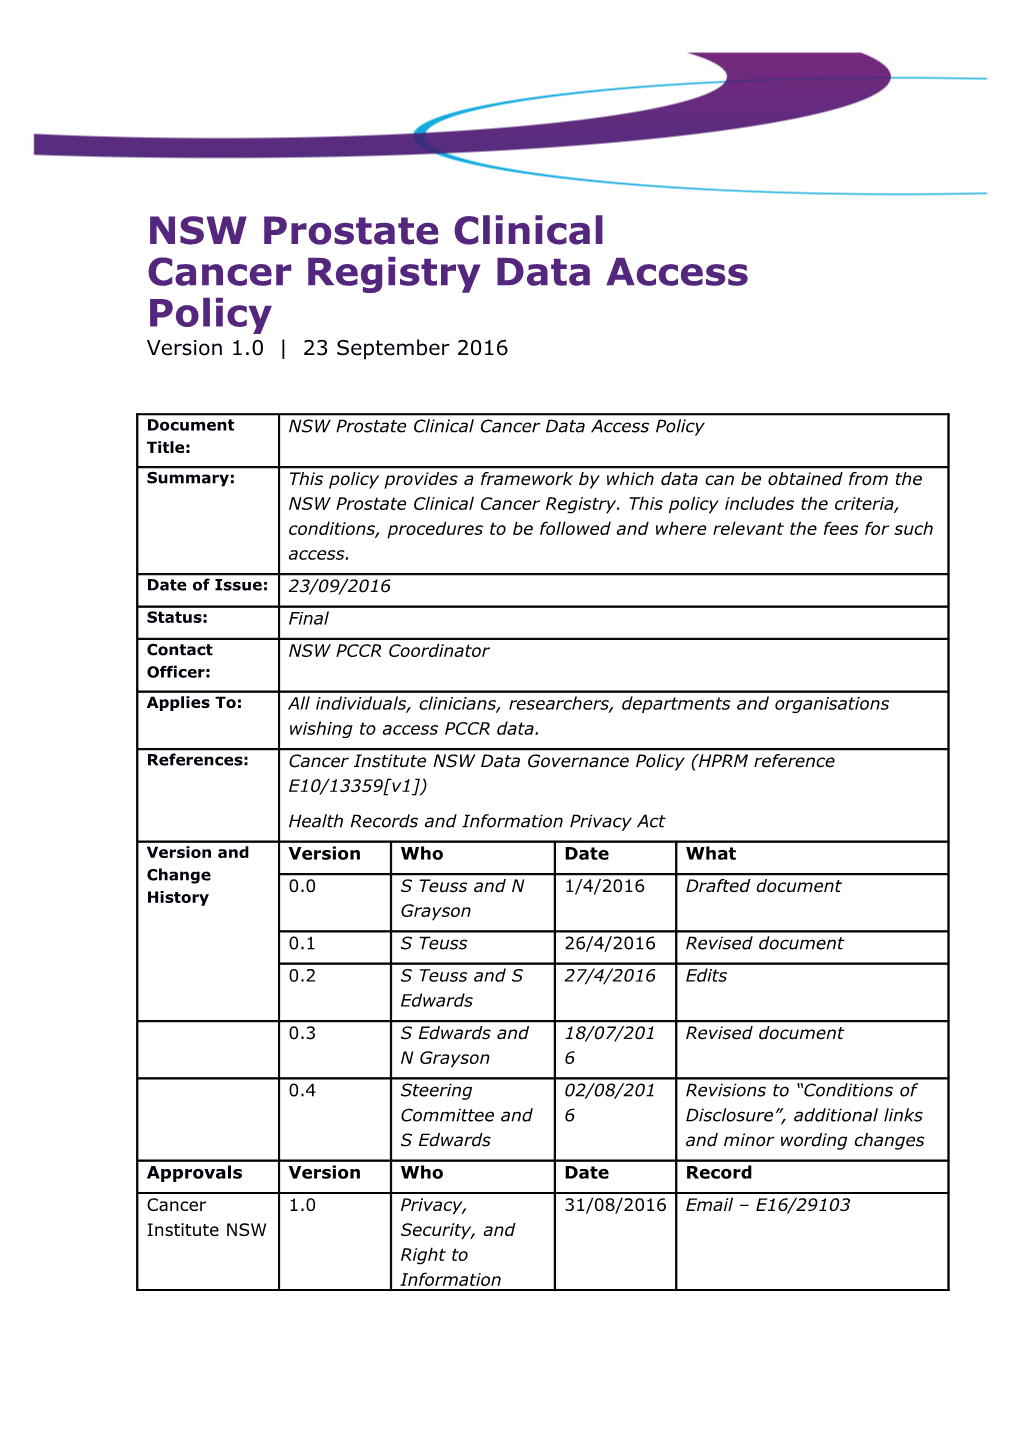 NSW Prostate Clinical Cancer Registry Data Access Policy